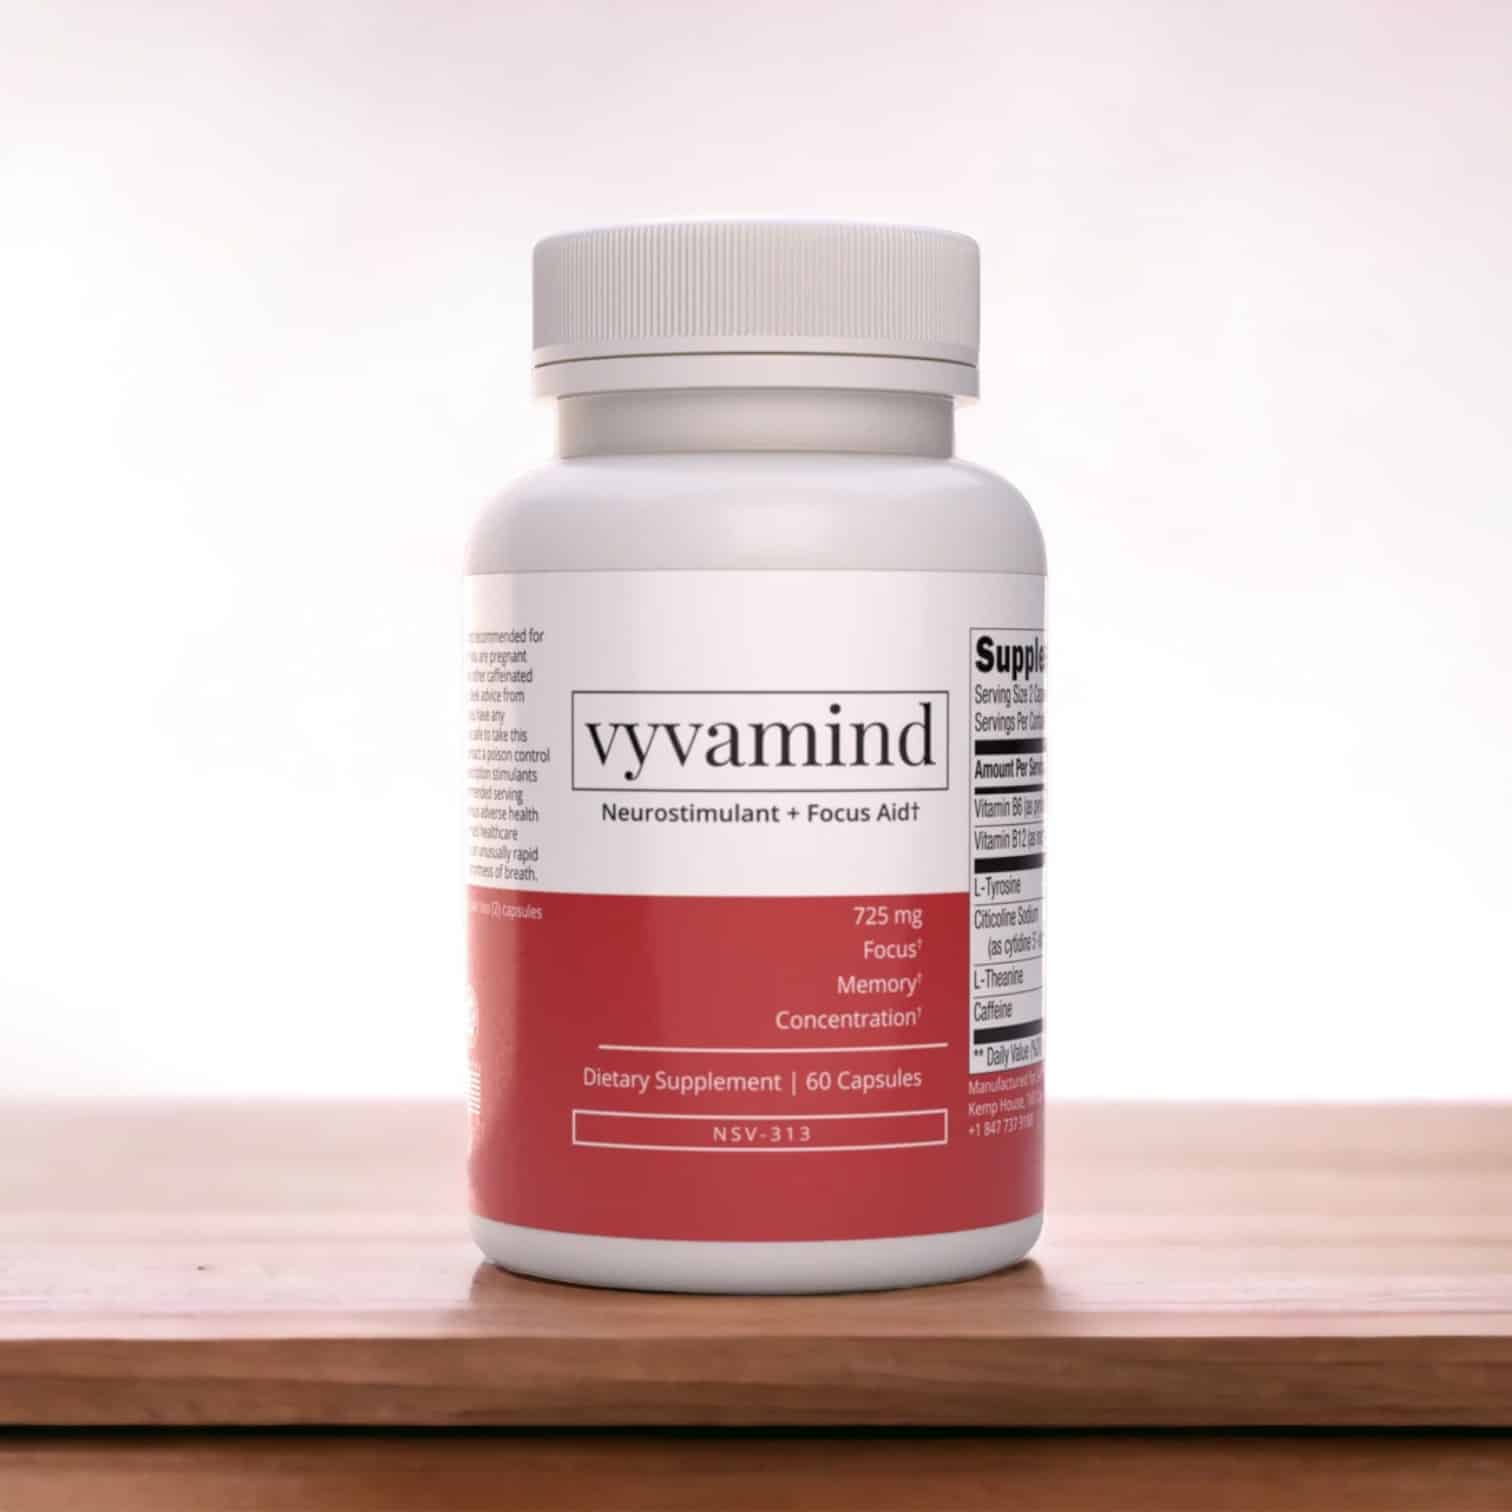 Over the counter Adderall Vyvamind - Best Alternative to Adderall